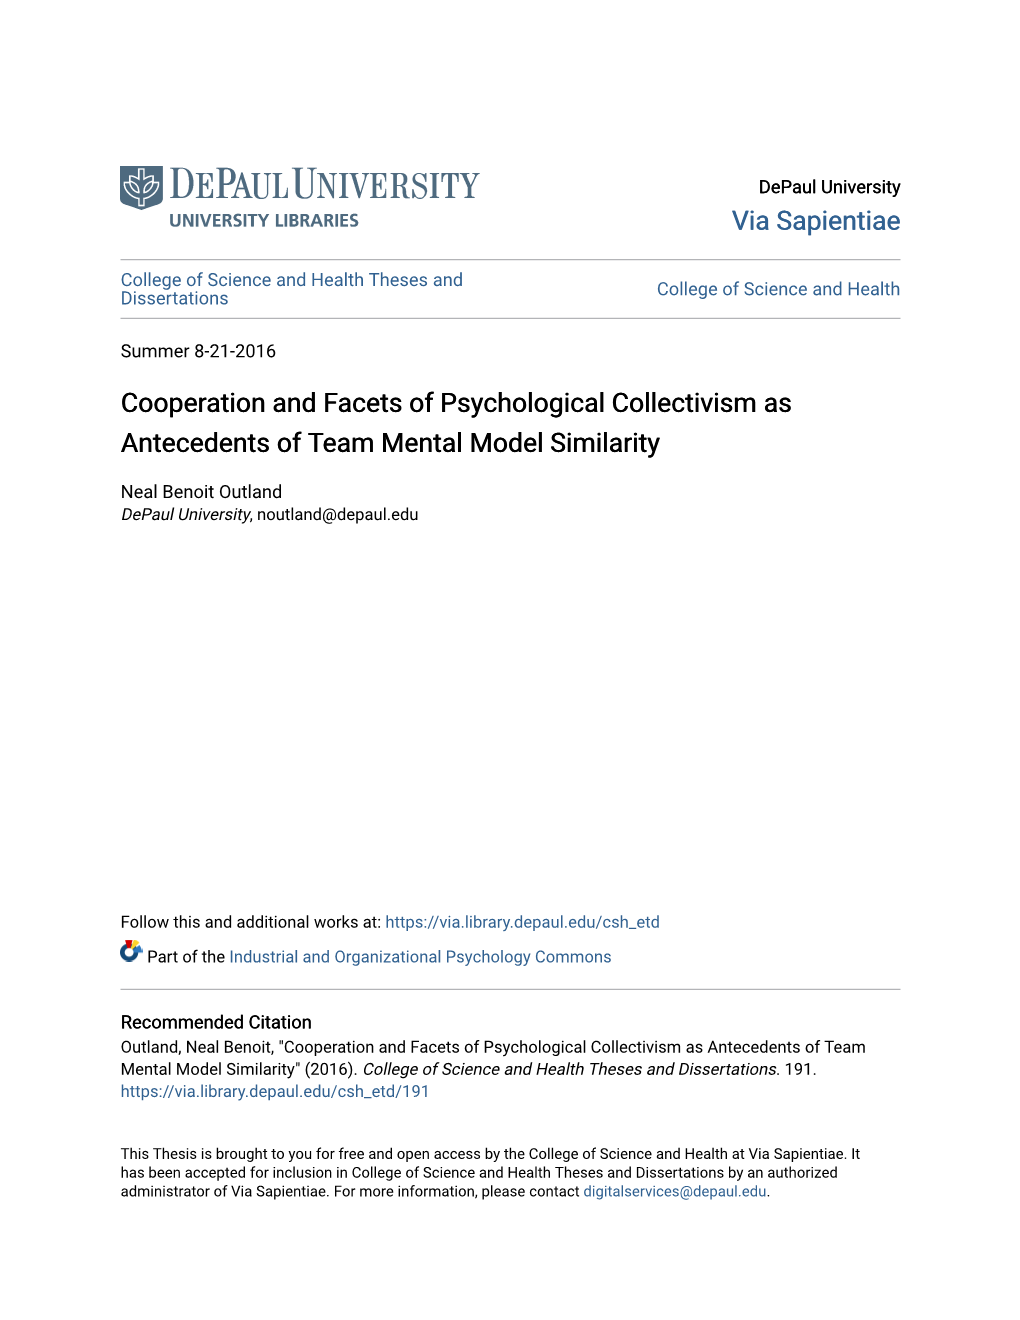 Cooperation and Facets of Psychological Collectivism As Antecedents of Team Mental Model Similarity